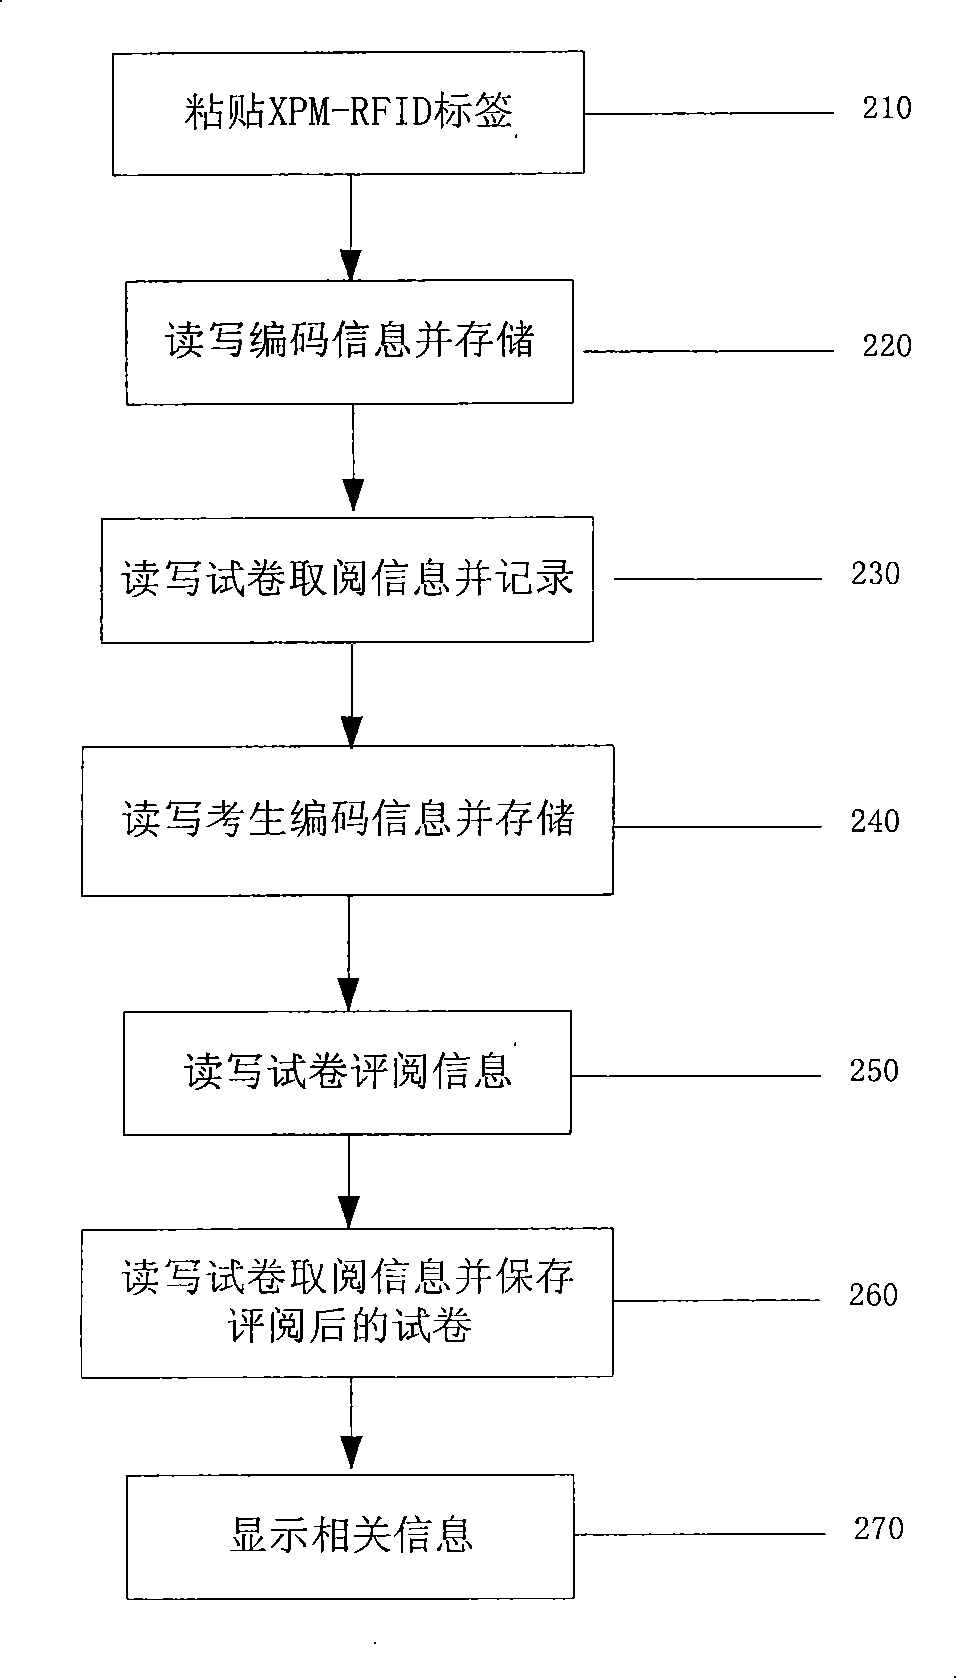 System and method for managing test paper using radio frequency recognizing technique